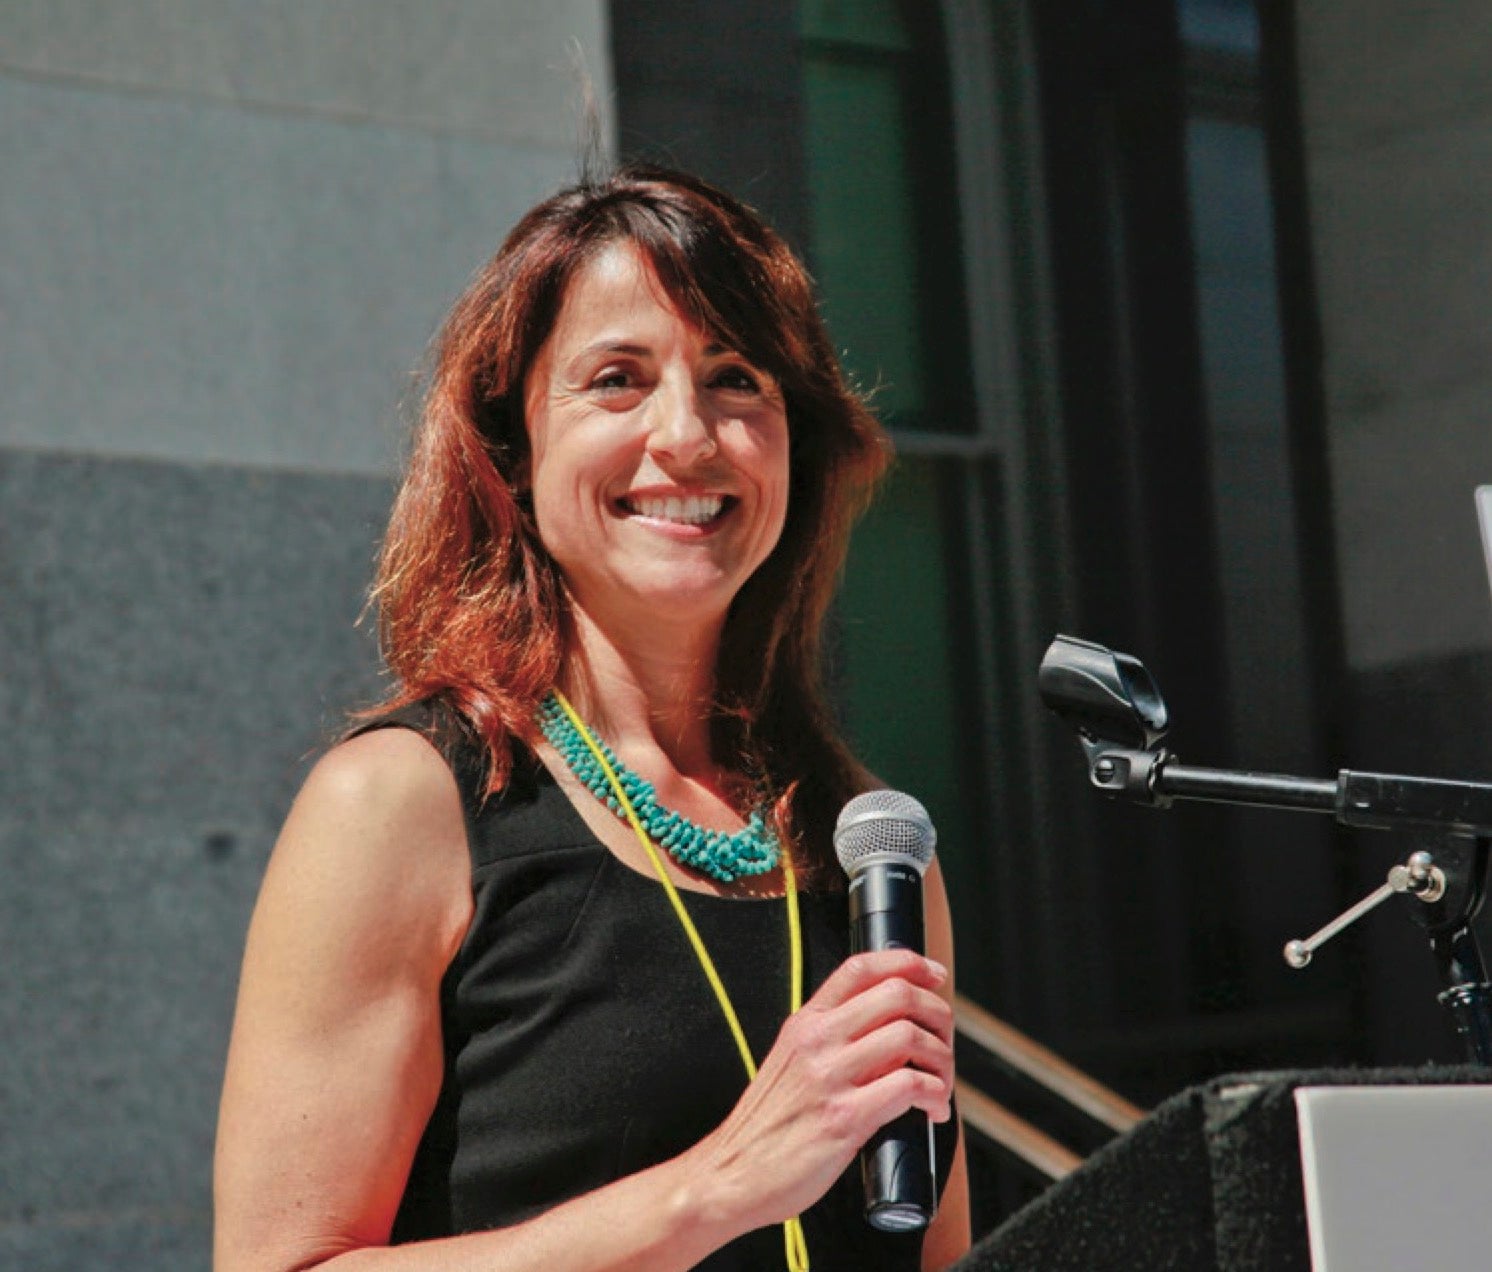 Jennifer Peck speaks during Summer Learning Day at the State Capitol in Sacramento in June 2012.